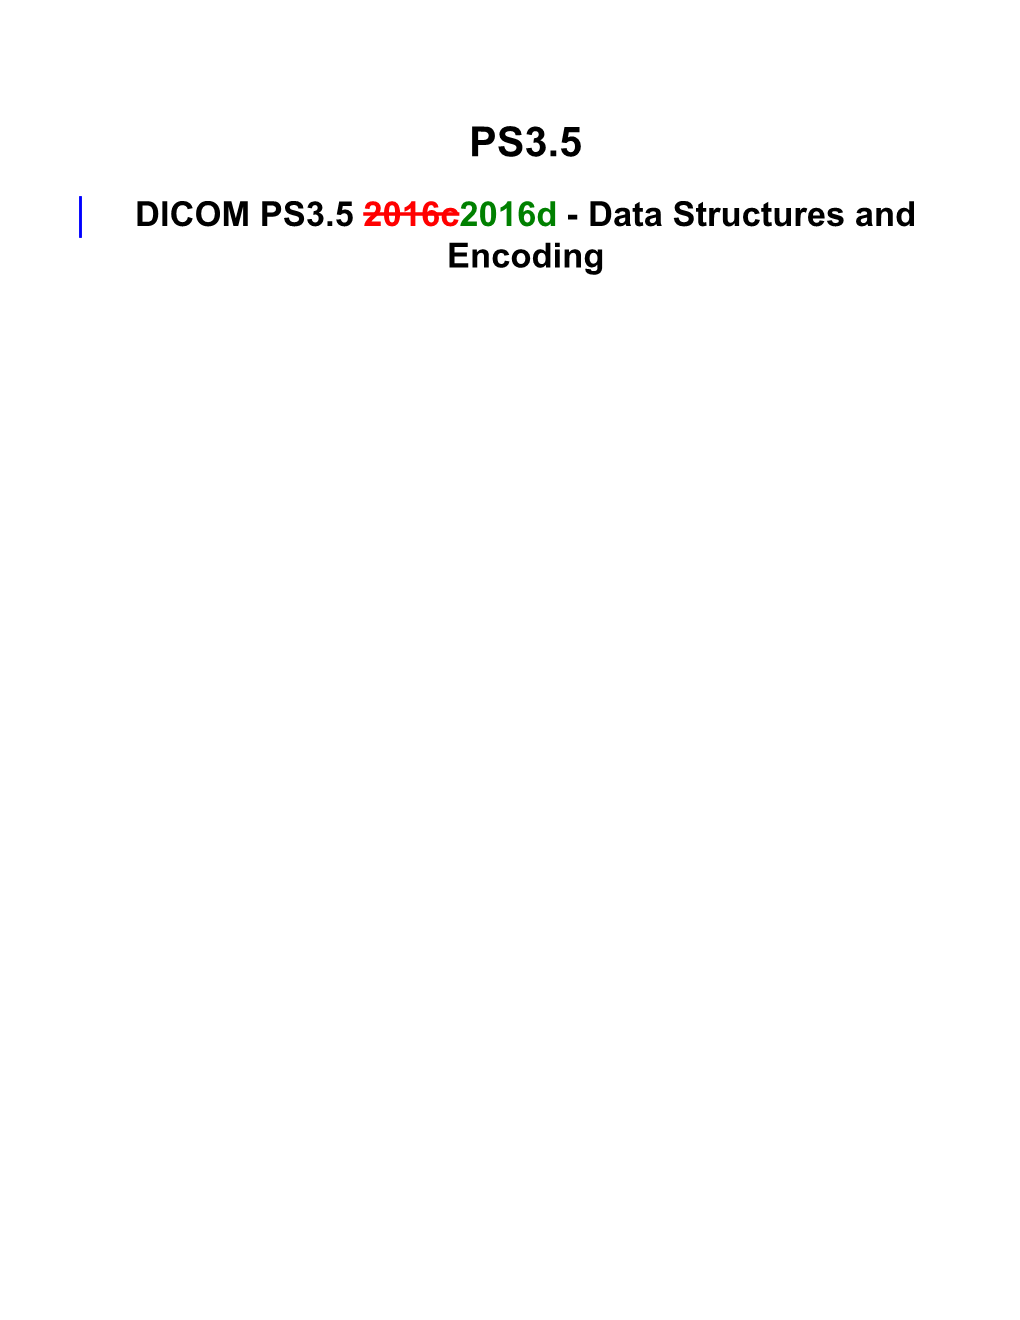 DICOM PS3.5 2016C2016d - Data Structures and Encoding Page 2